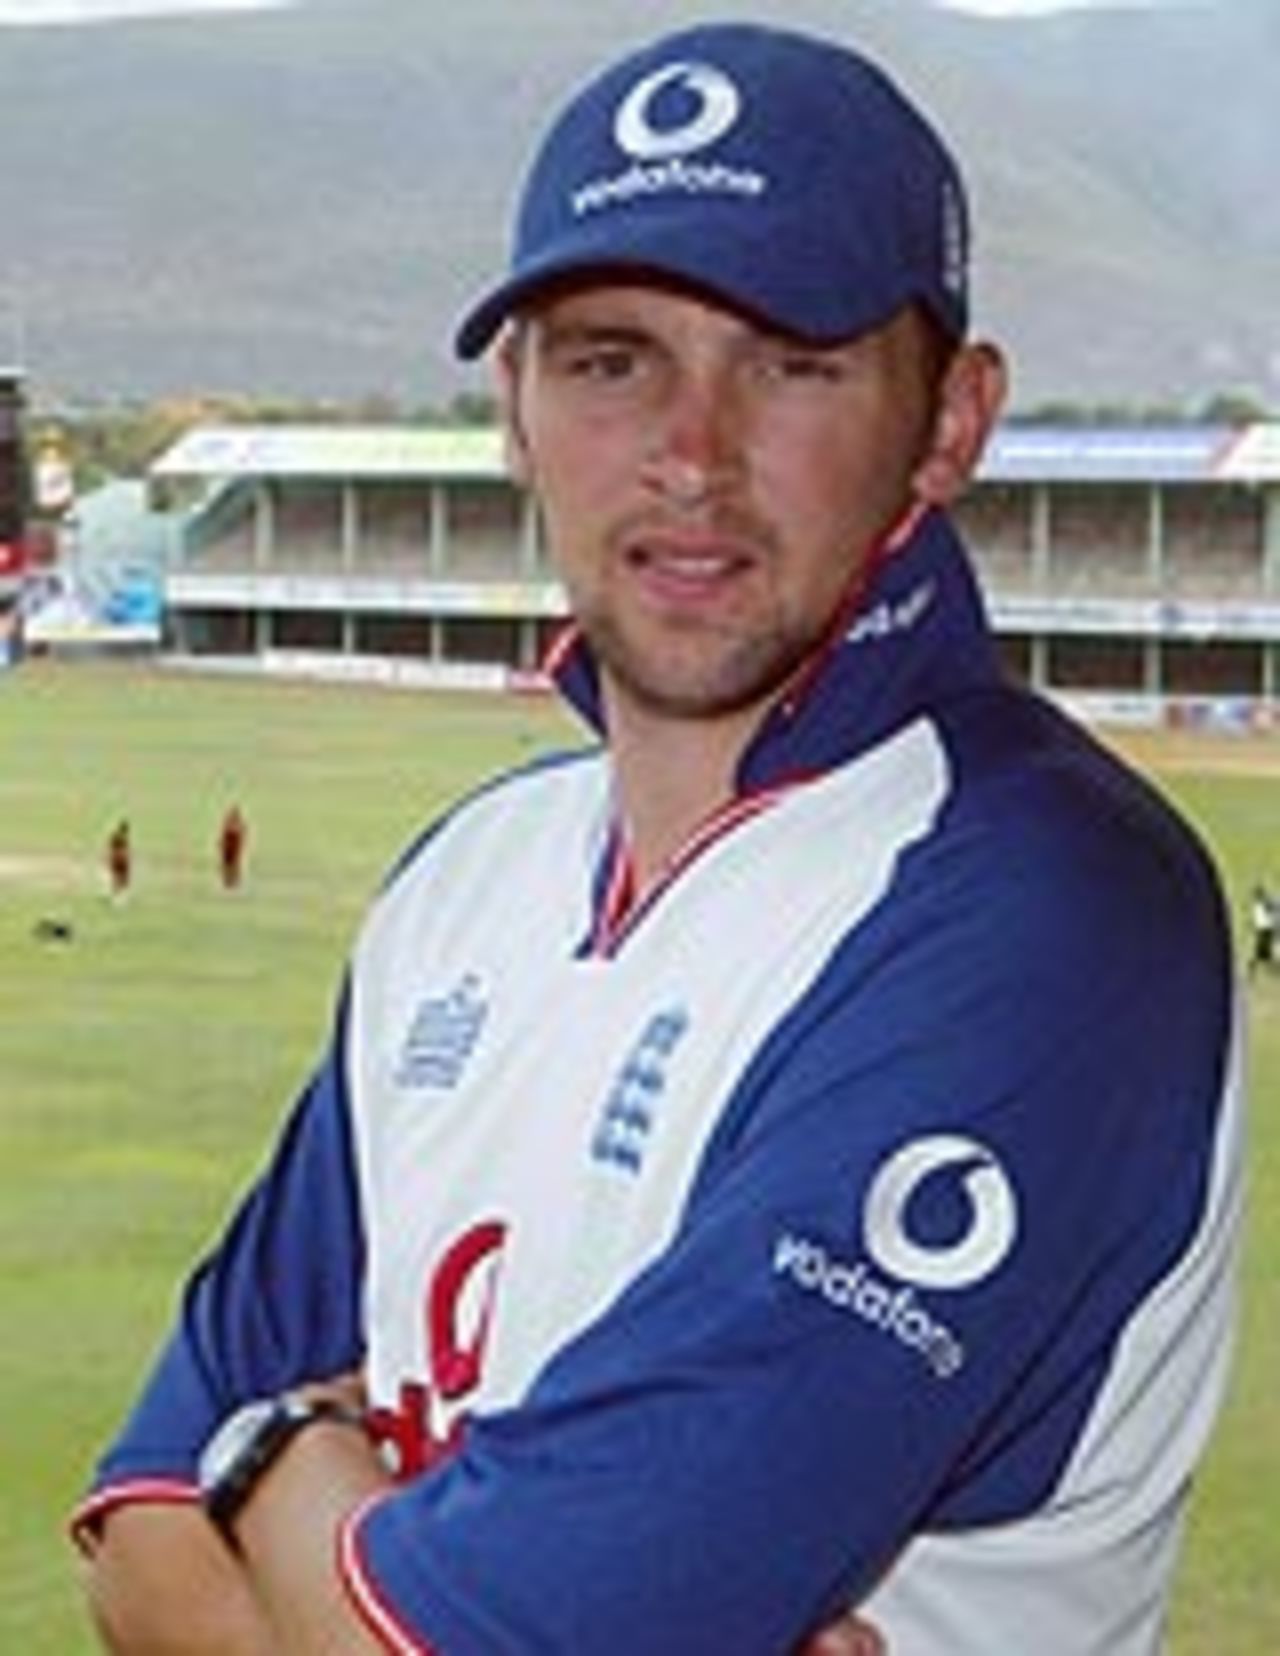 Steve Harmison, Lord of Kingston, England in West Indies, Jamaica, March 2004